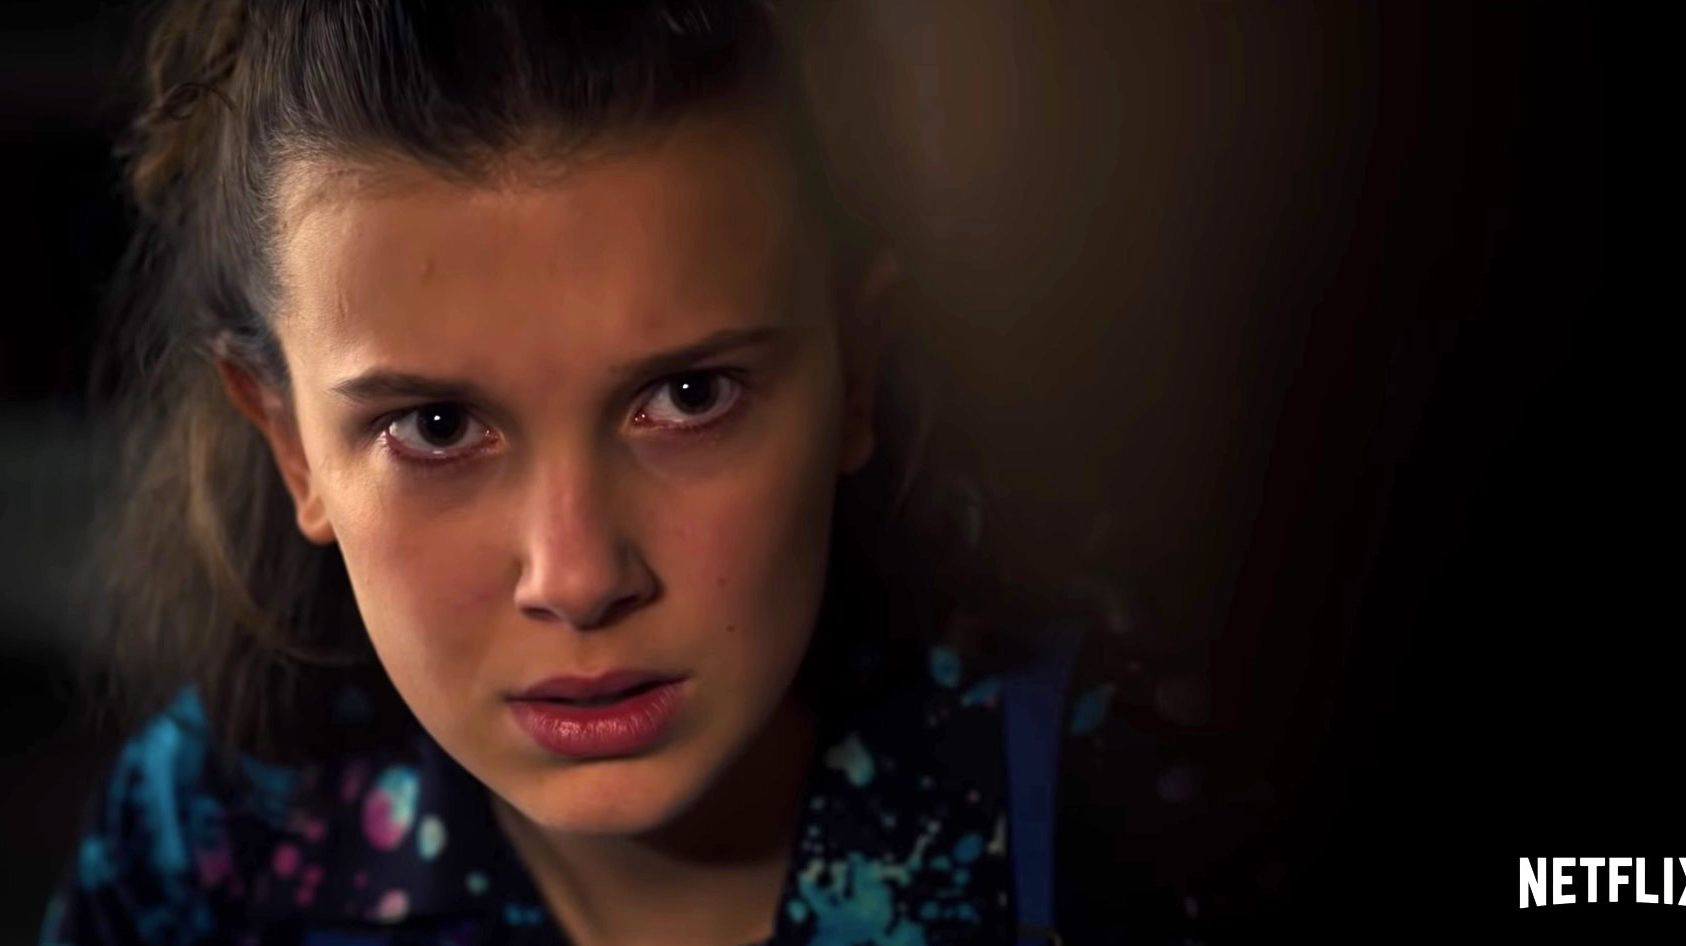 Who Died In Stranger Things? Season 3 Finale, Explained